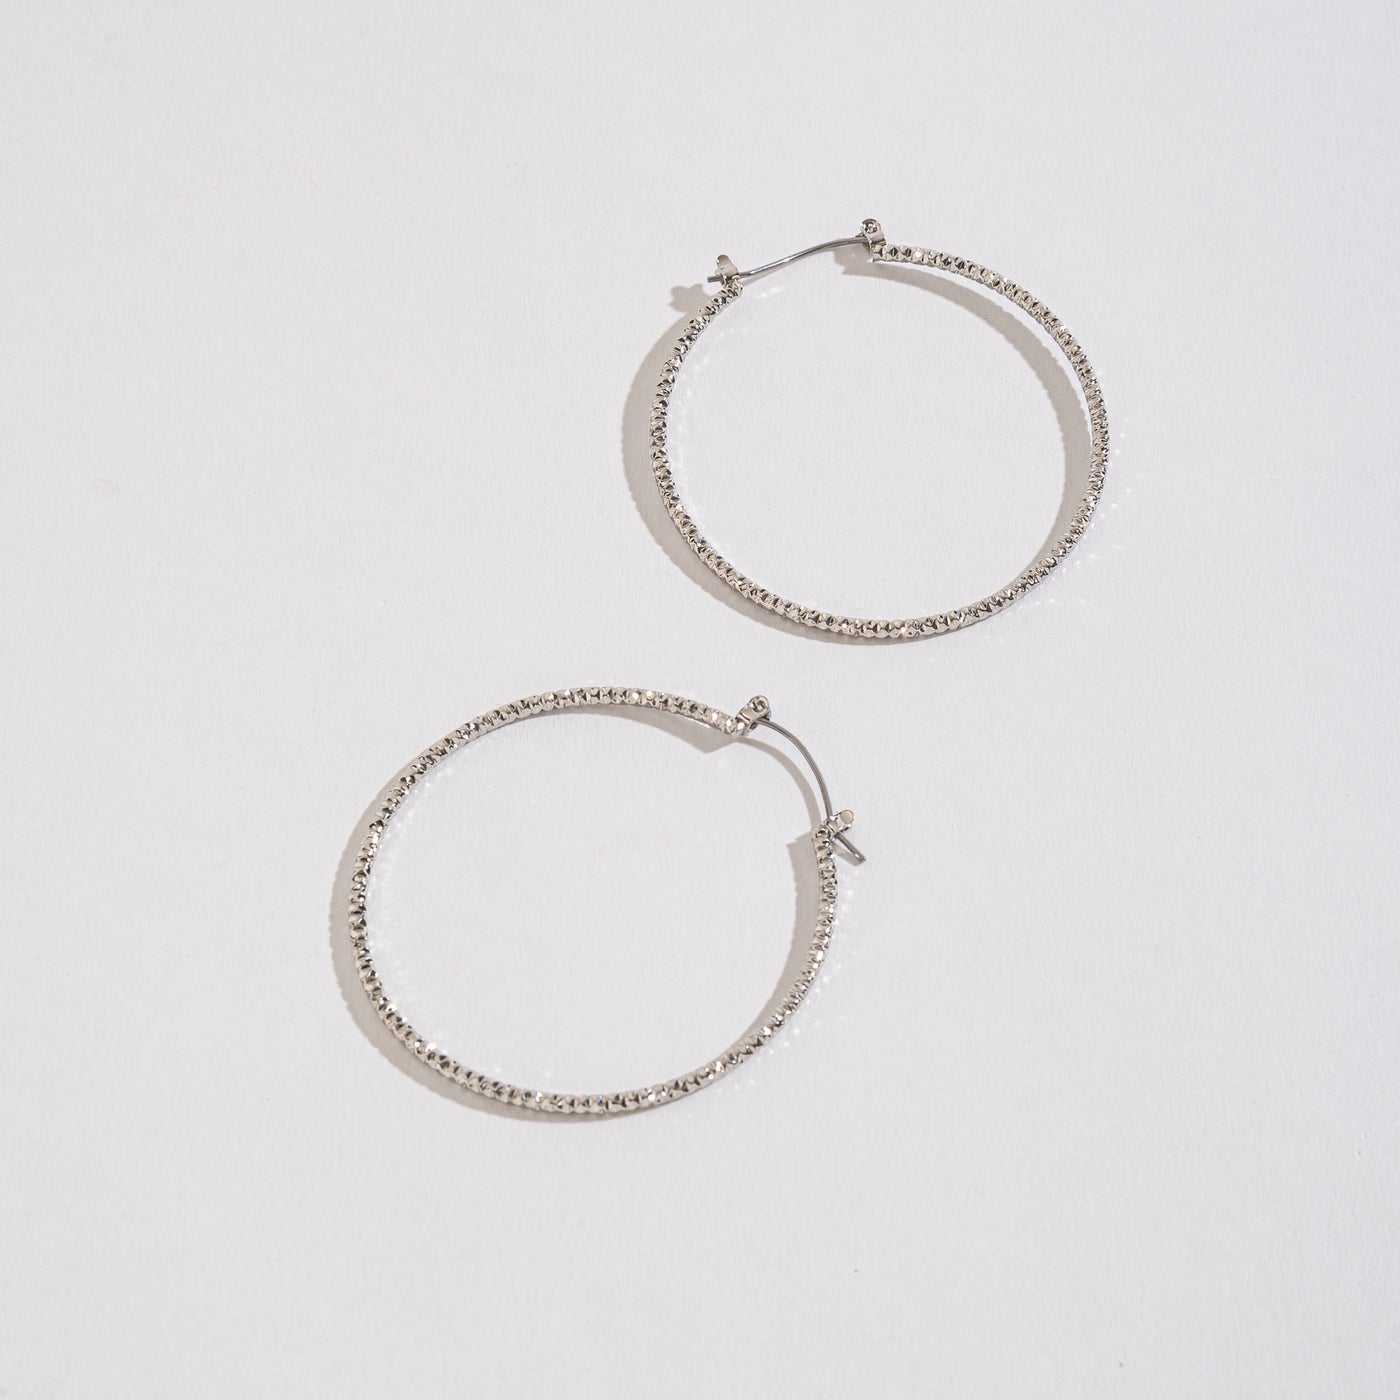 silver textured hoops on a white background.